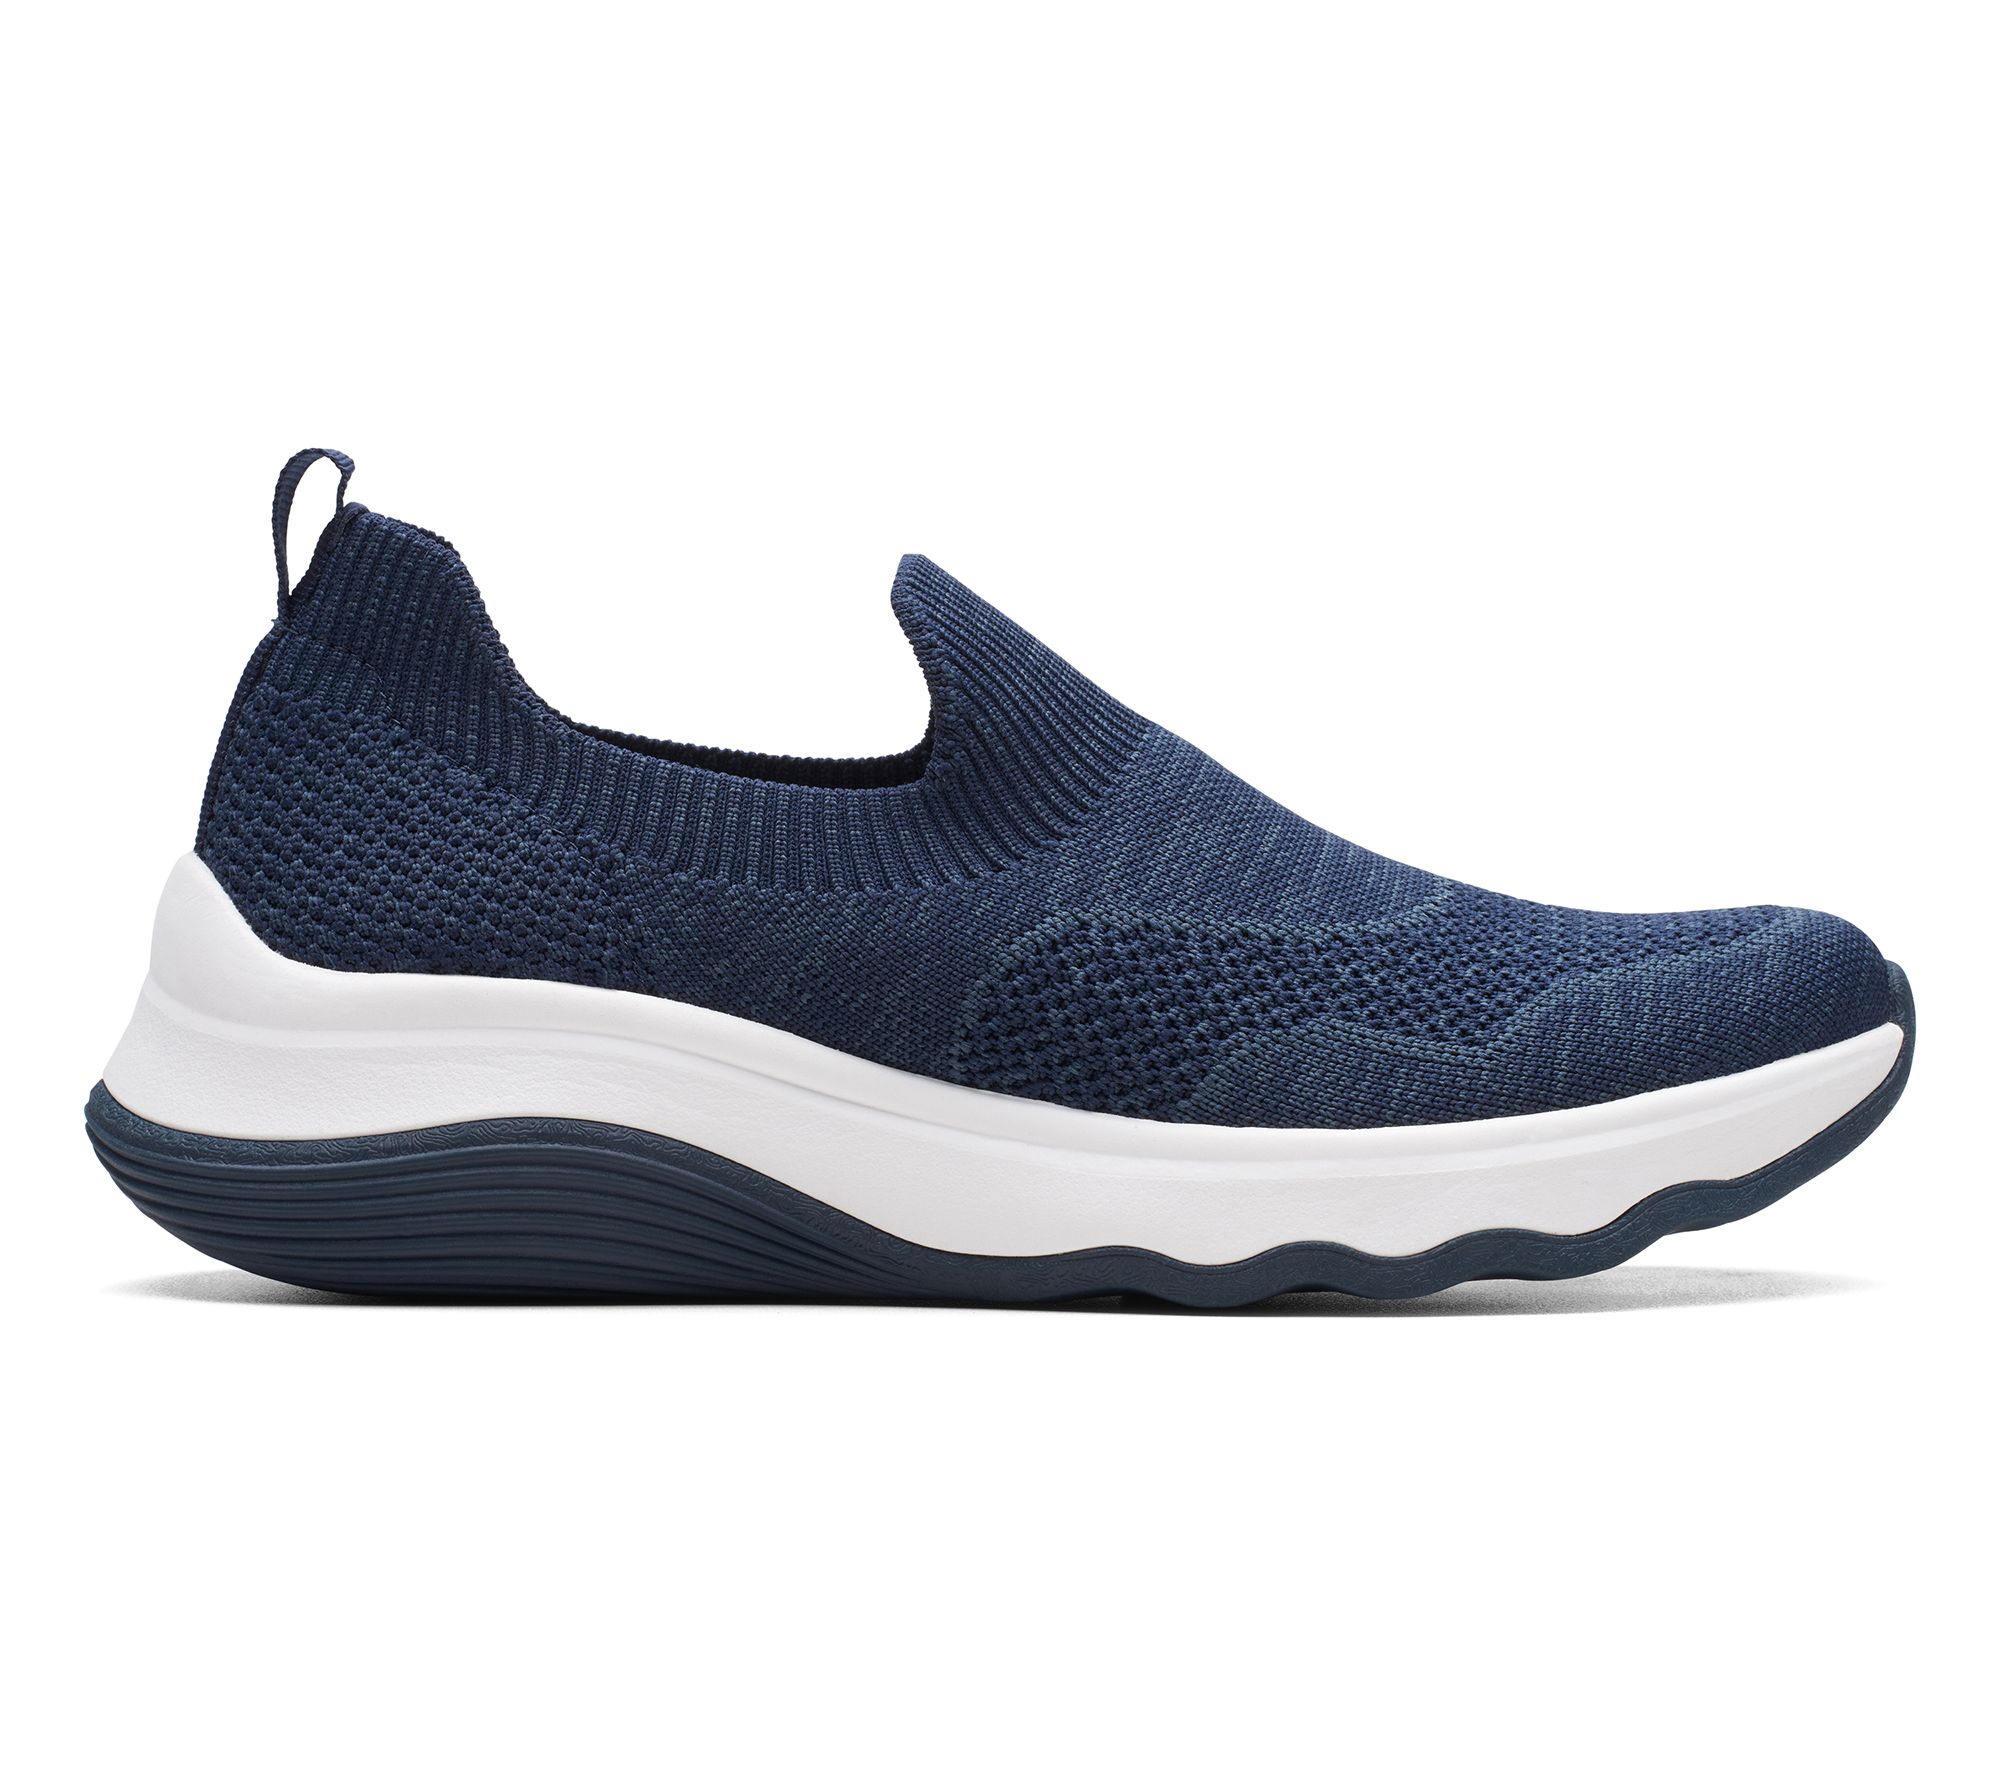 Clarks Cloudsteppers Slip-On Knit Sneaker - Circuit Path - QVC.com